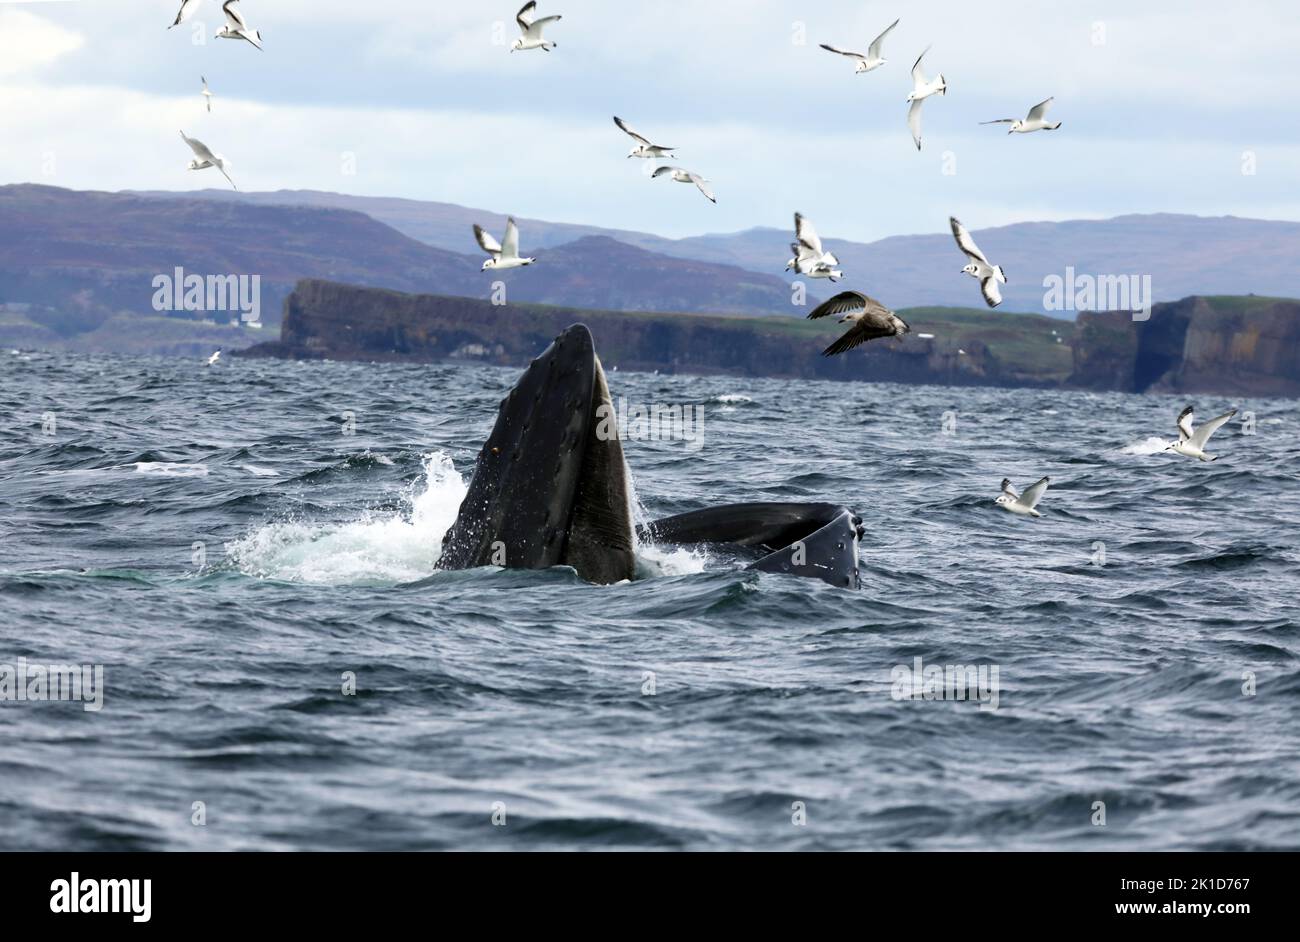 17 Sep 2022 Isle of Mull, Scotland - Rare sighting of Humpback Whale off the coast of the Isles of Mull & Iona in the Inner Hebrides of Scotland Stock Photo